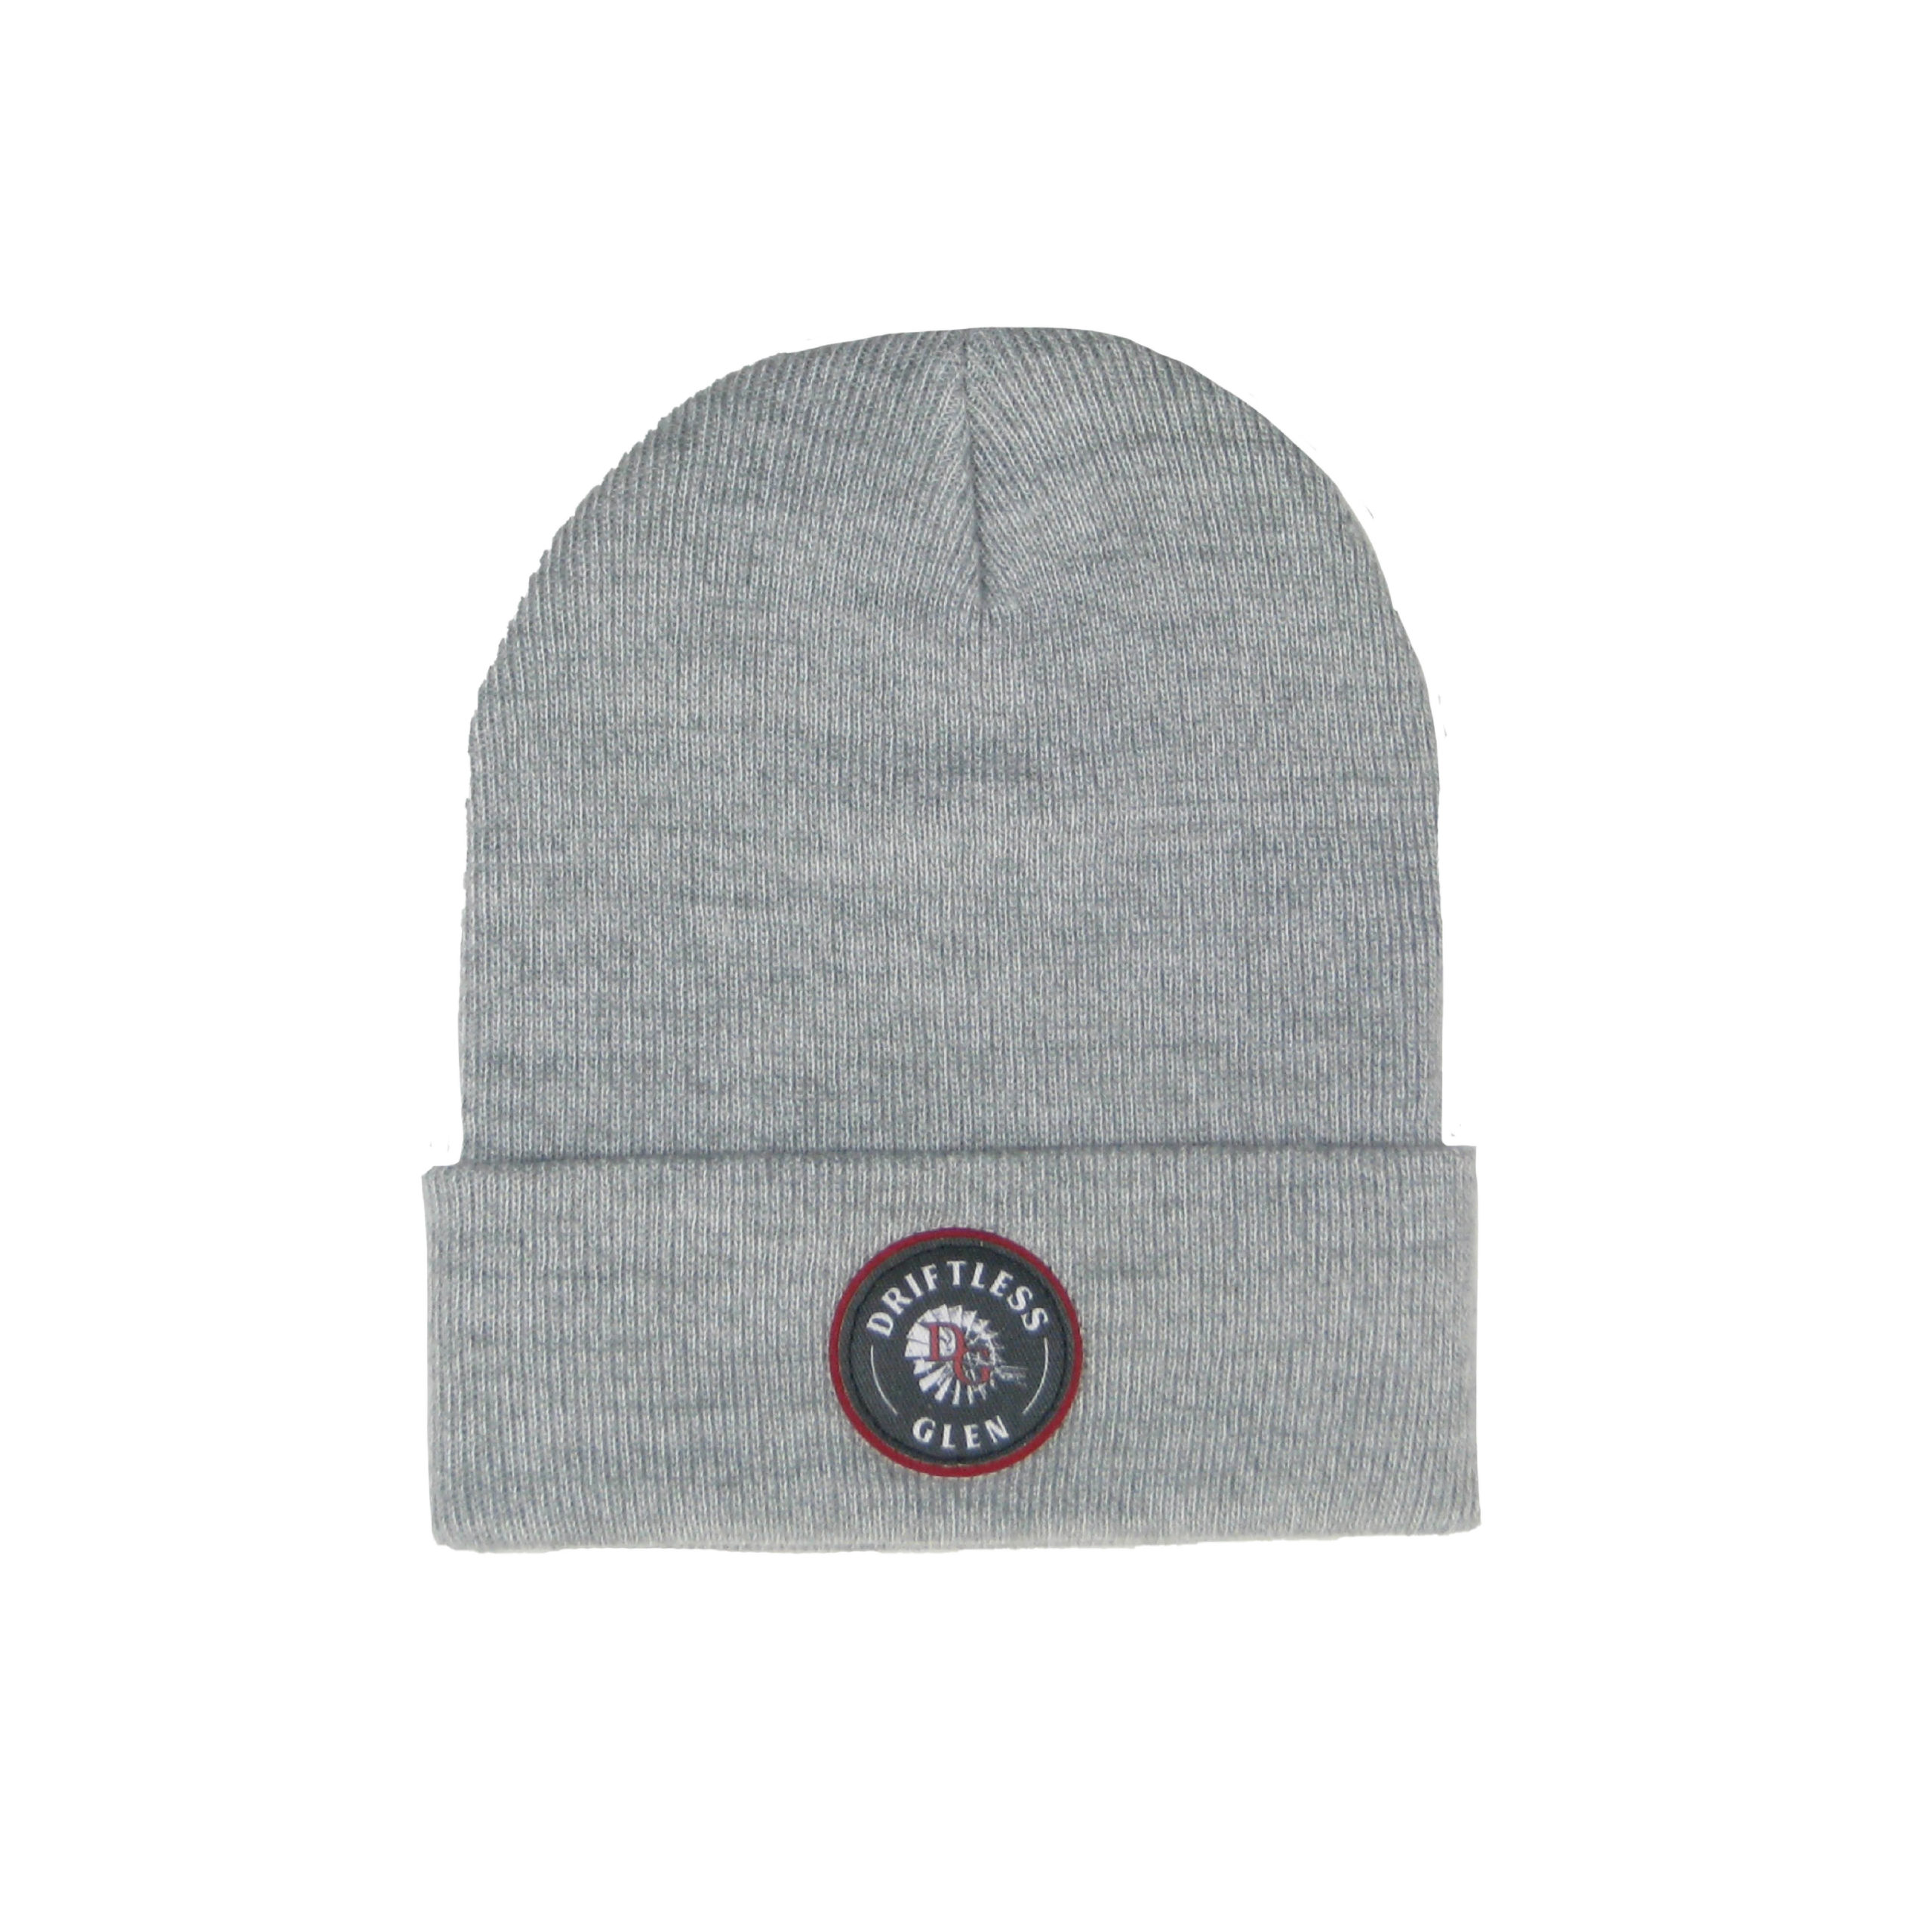 Grey beanie with black and red circle logo patch